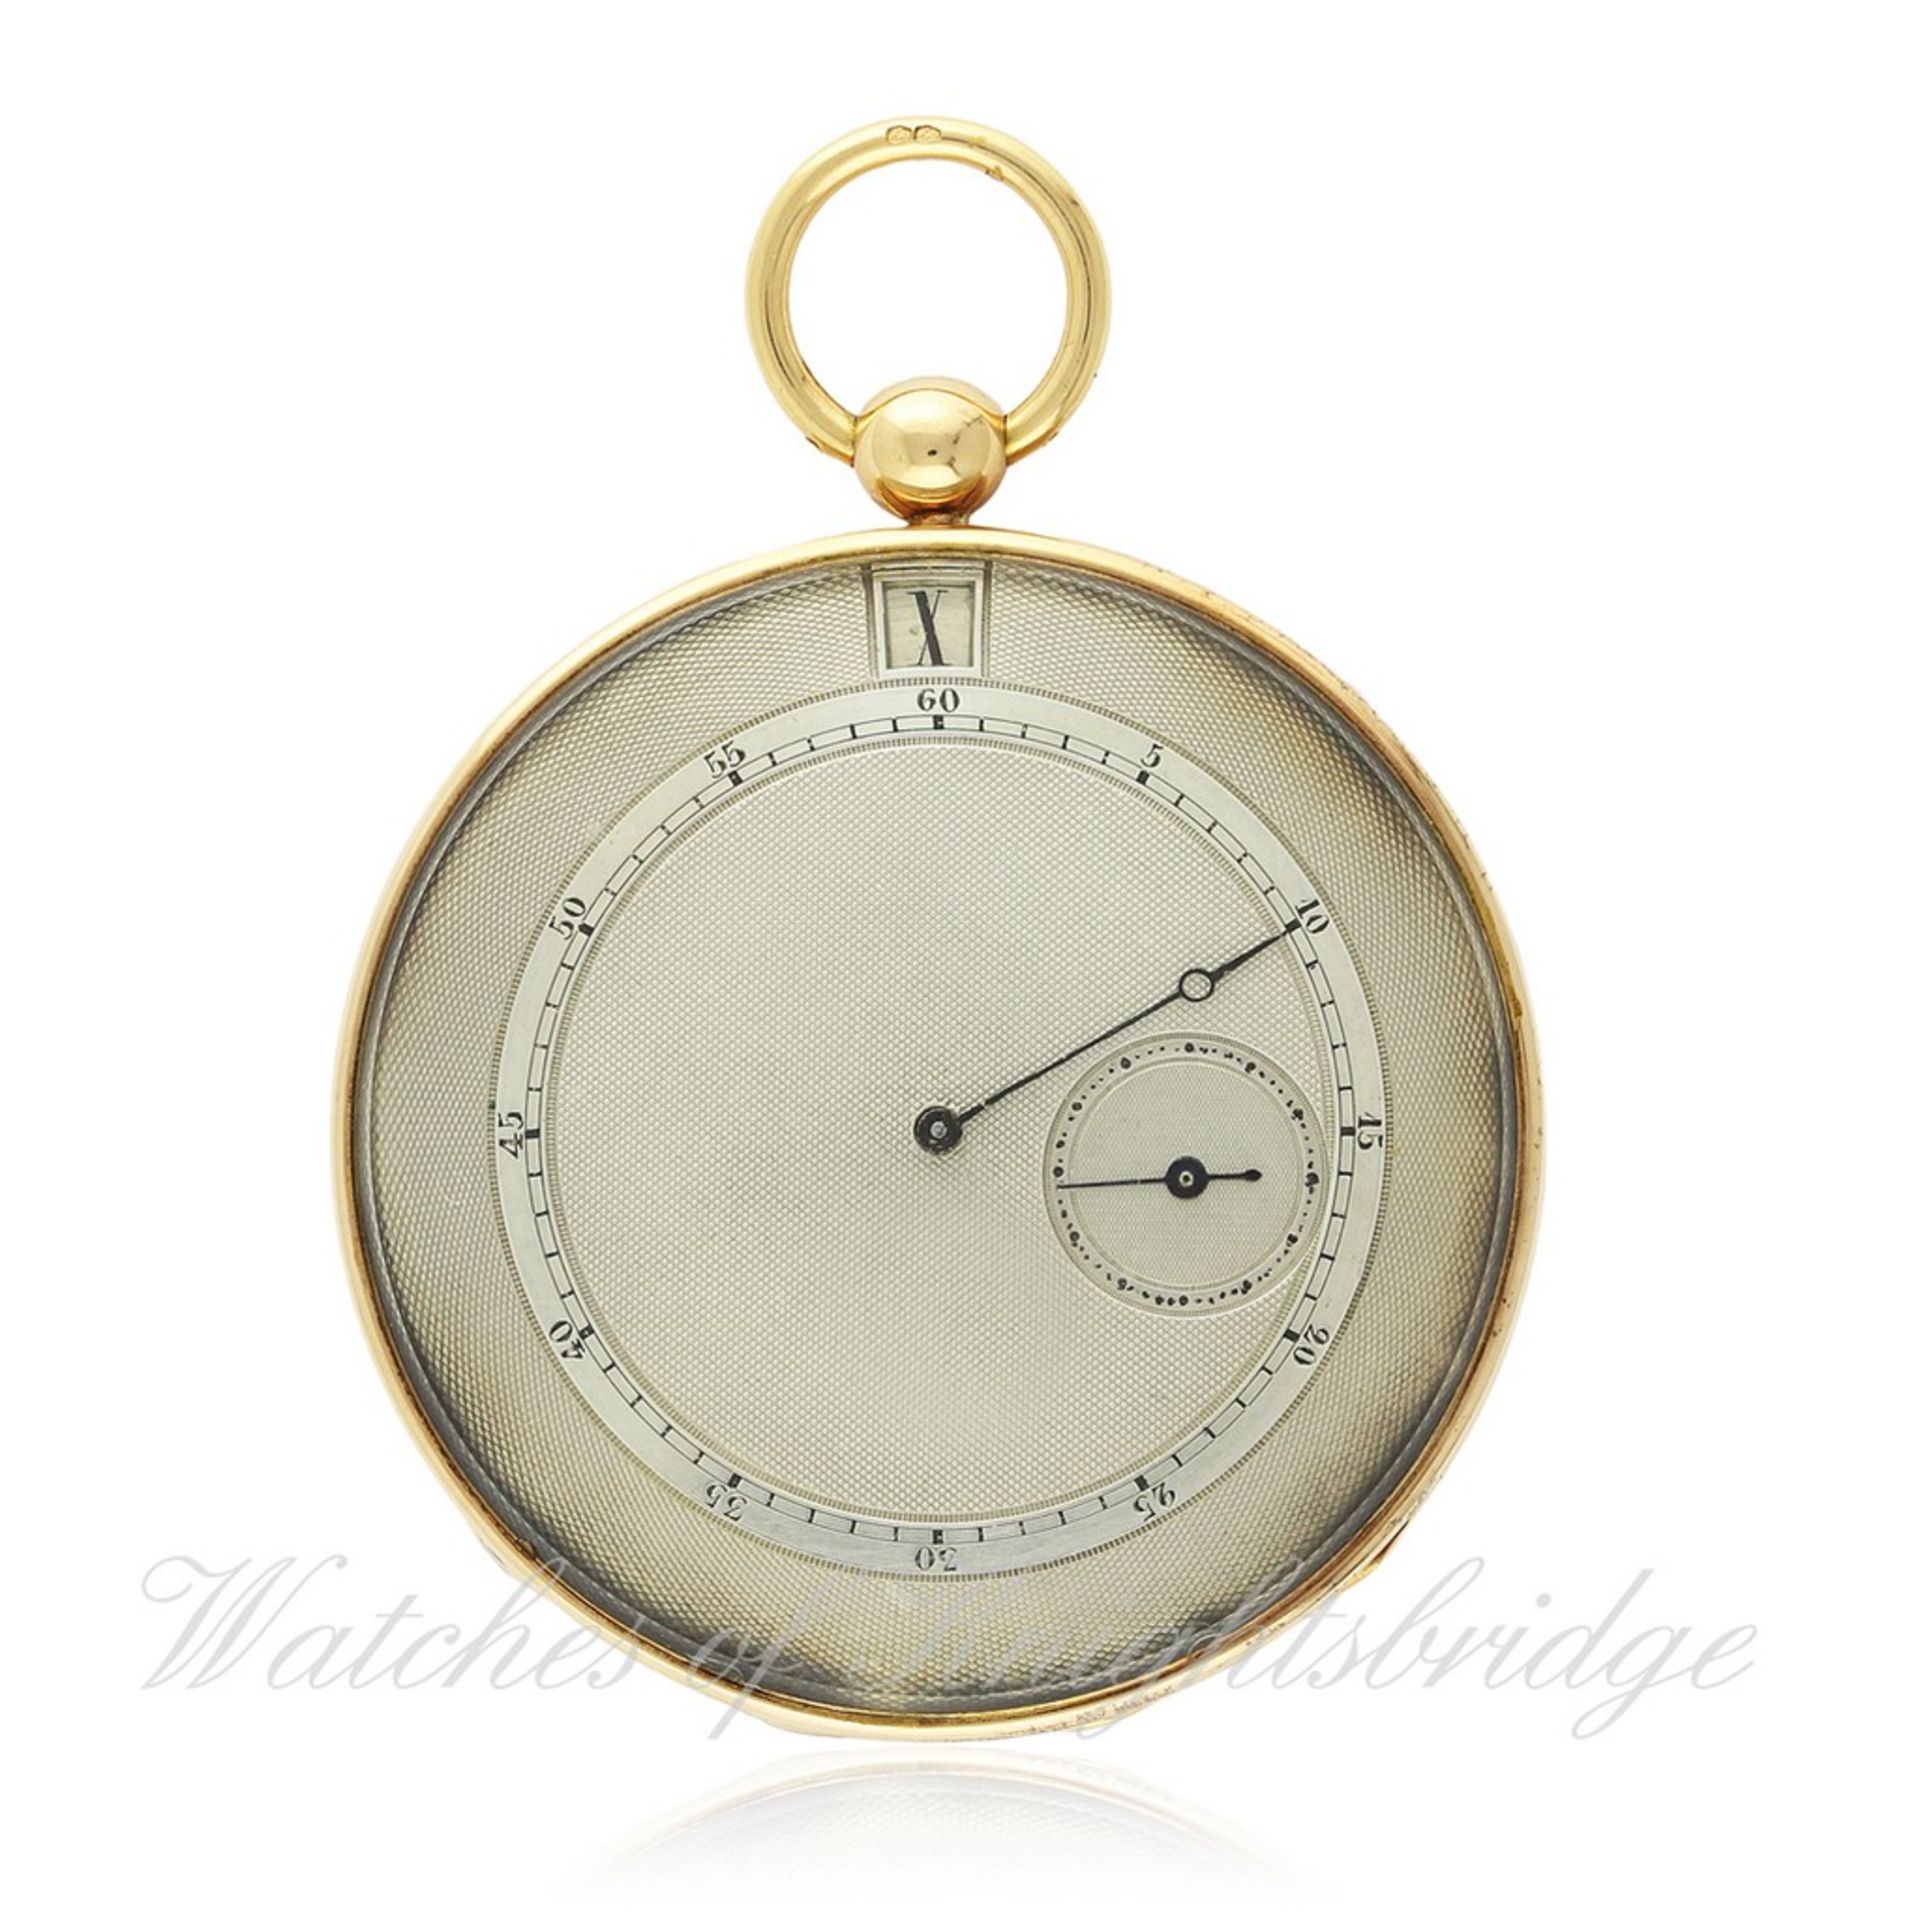 A FINE & RARE GENTLEMAN`S LARGE 18K SOLID GOLD JUMP HOUR POCKET WATCH CIRCA 1830 D: Silver guilloche